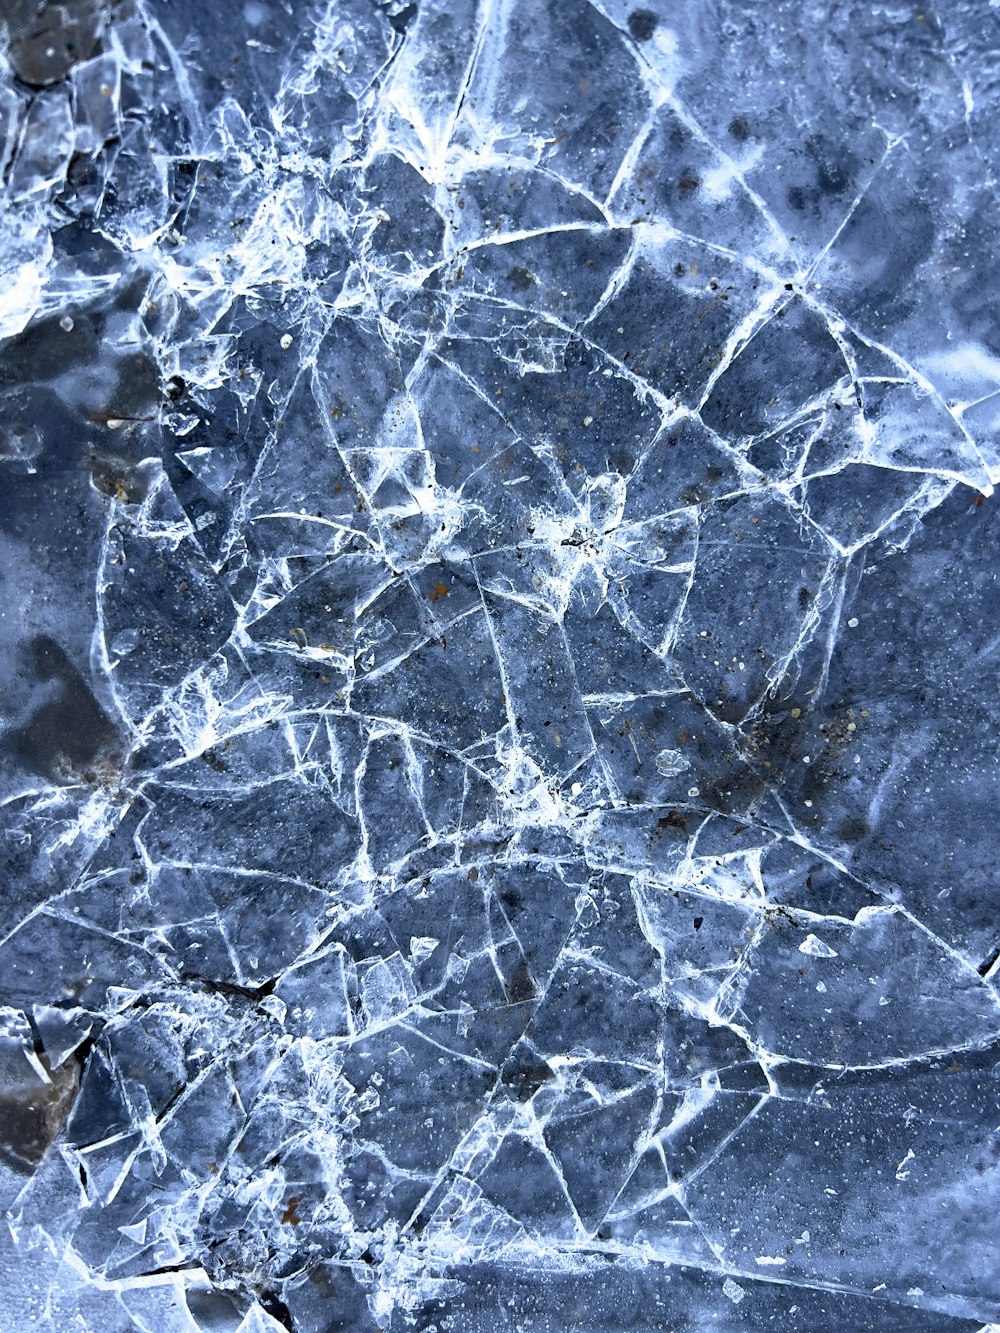 a close up of a cracked glass surface